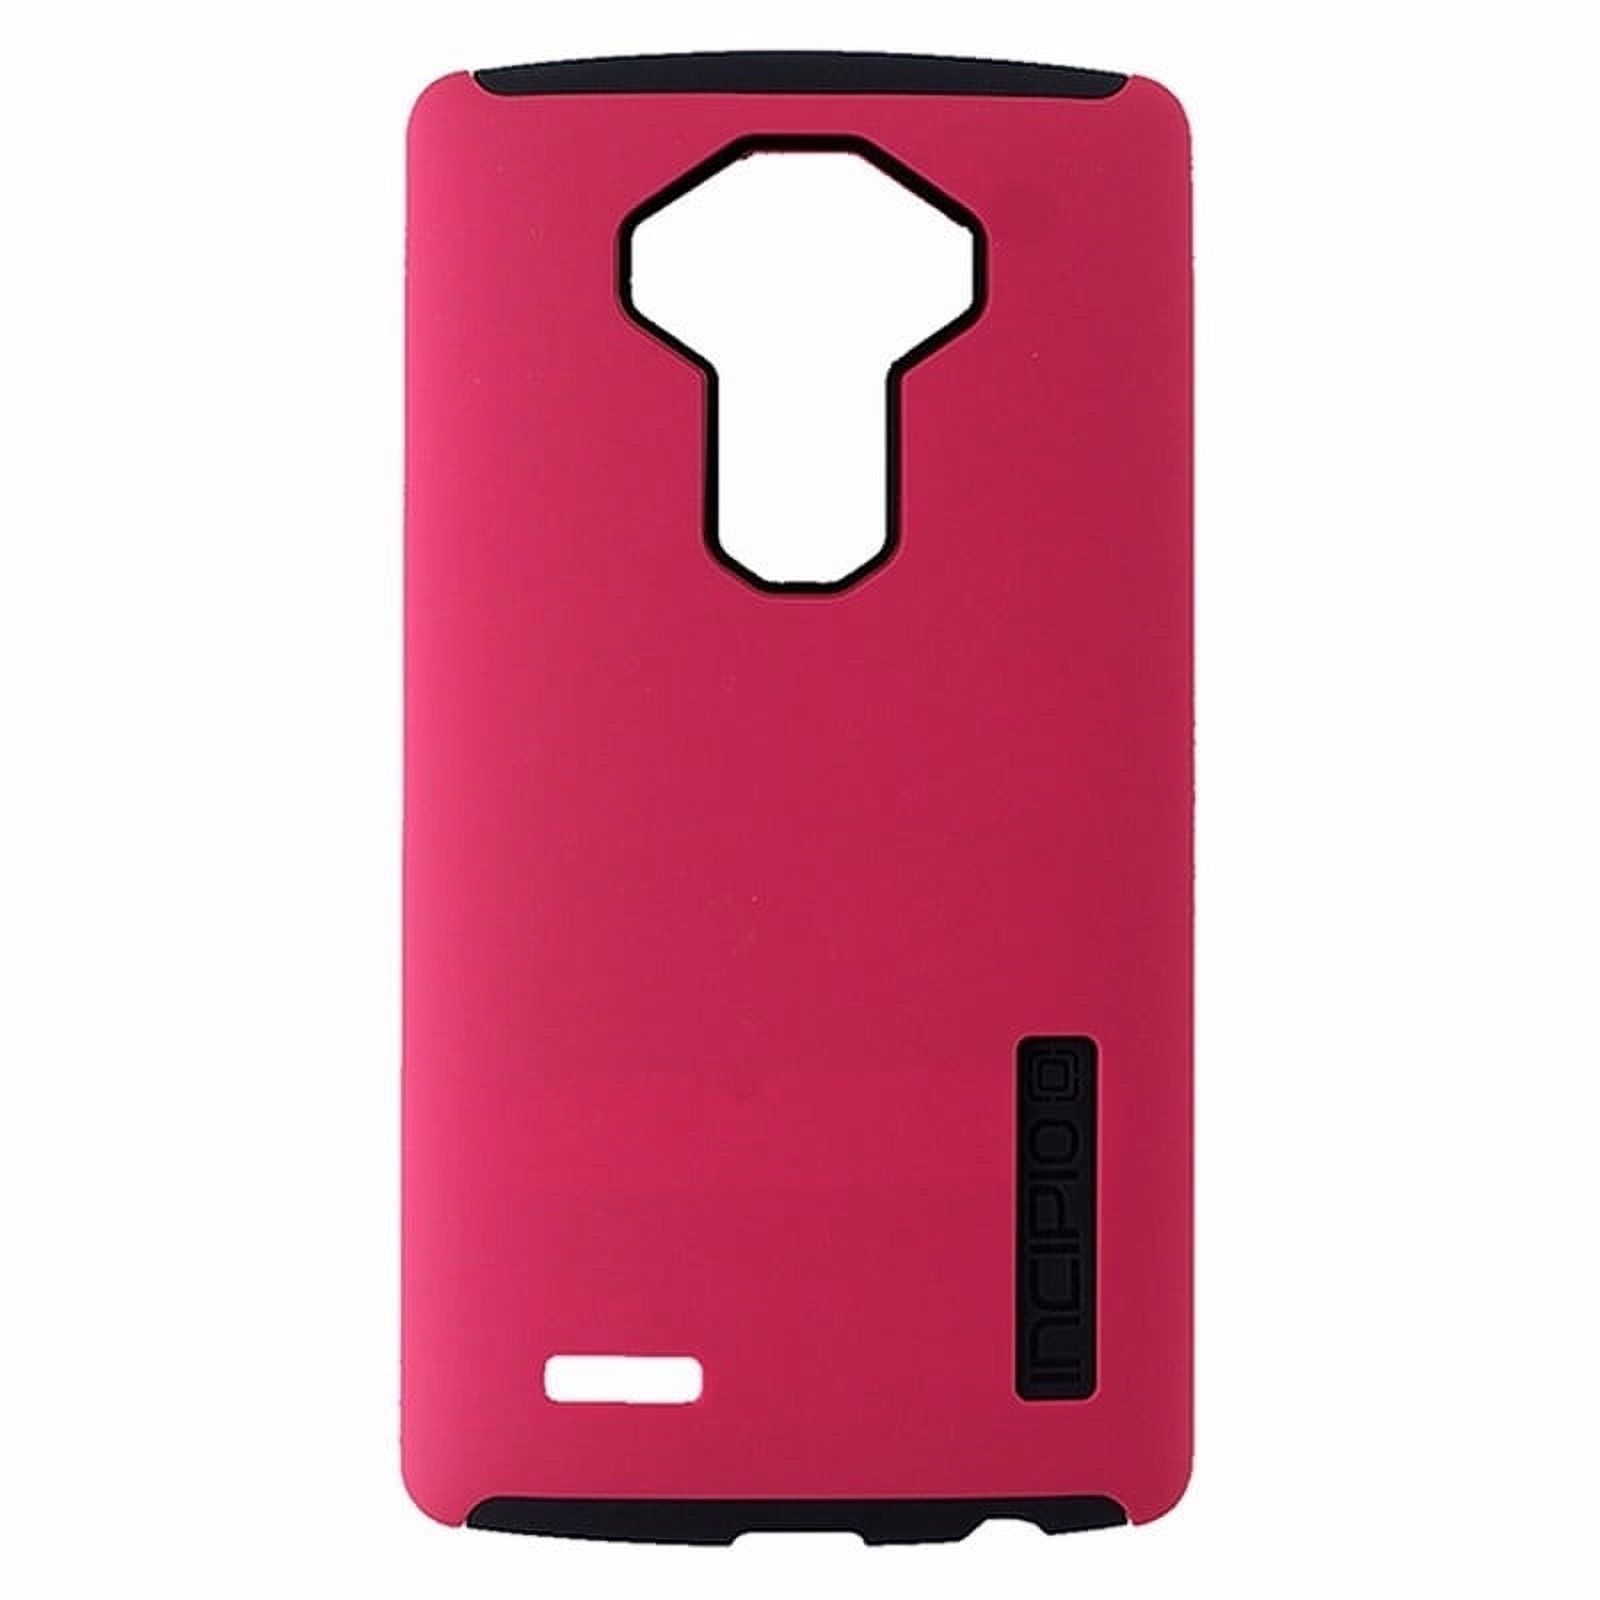 Incipio DualPro Series Case for LG G4 Smartphones - Matte Pink/Charcoal Gray - image 1 of 2